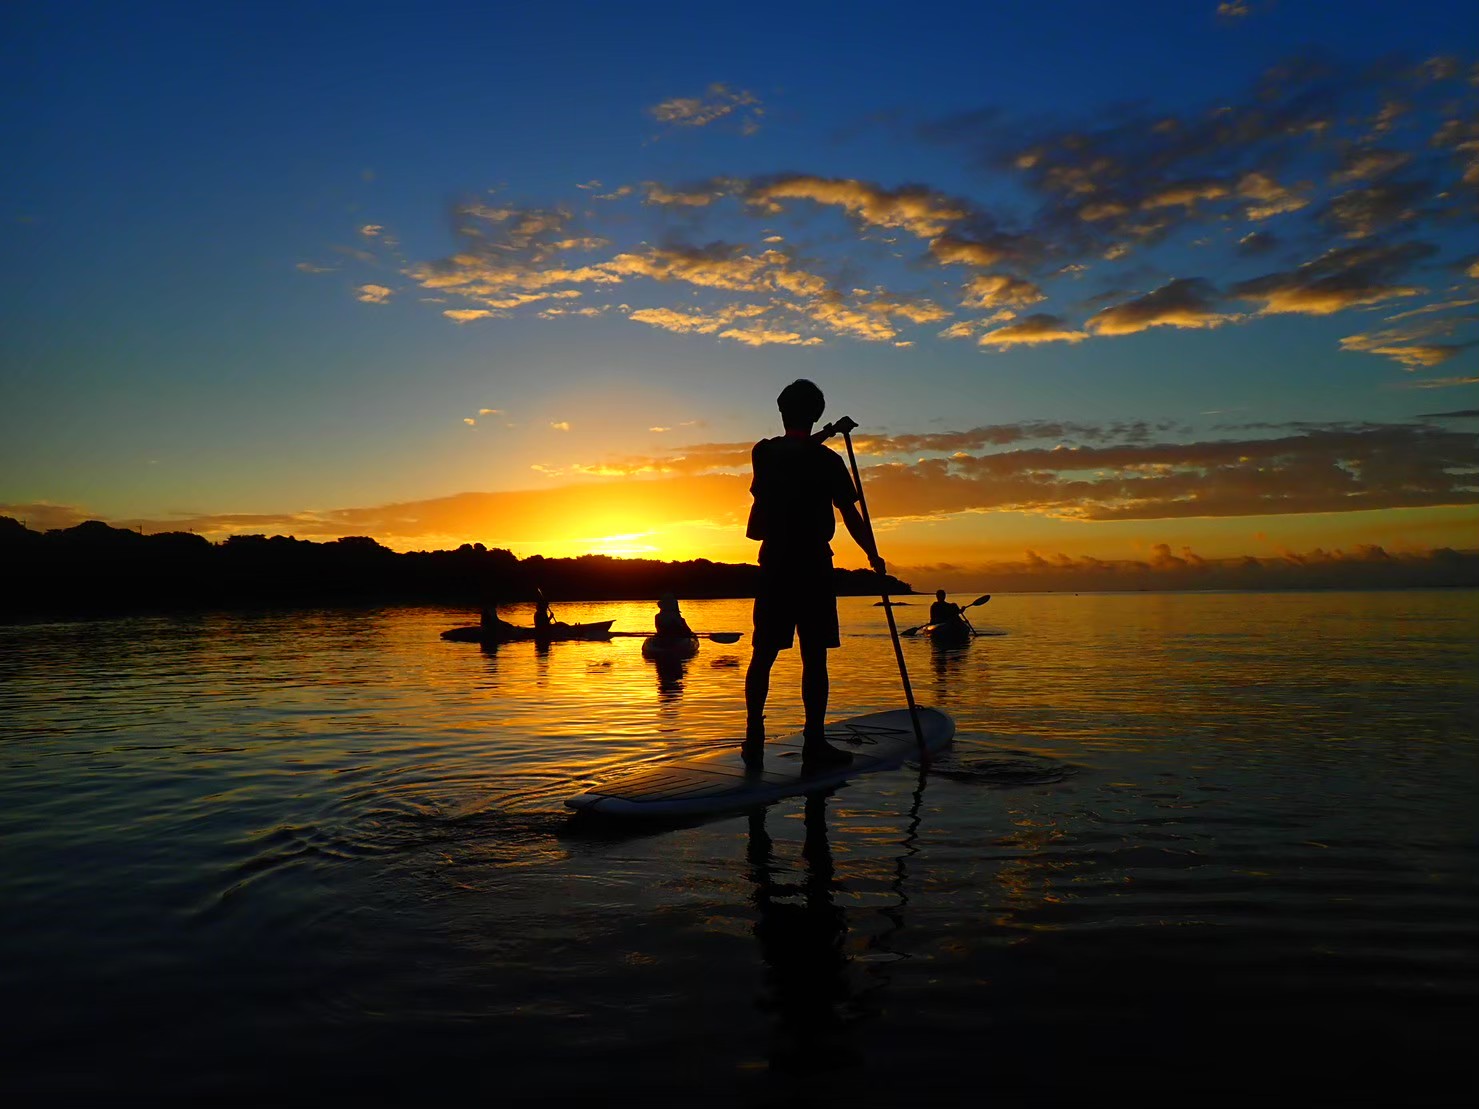 A refreshing and moving experience from the morning! Sunrise SUP / Canoe Tour